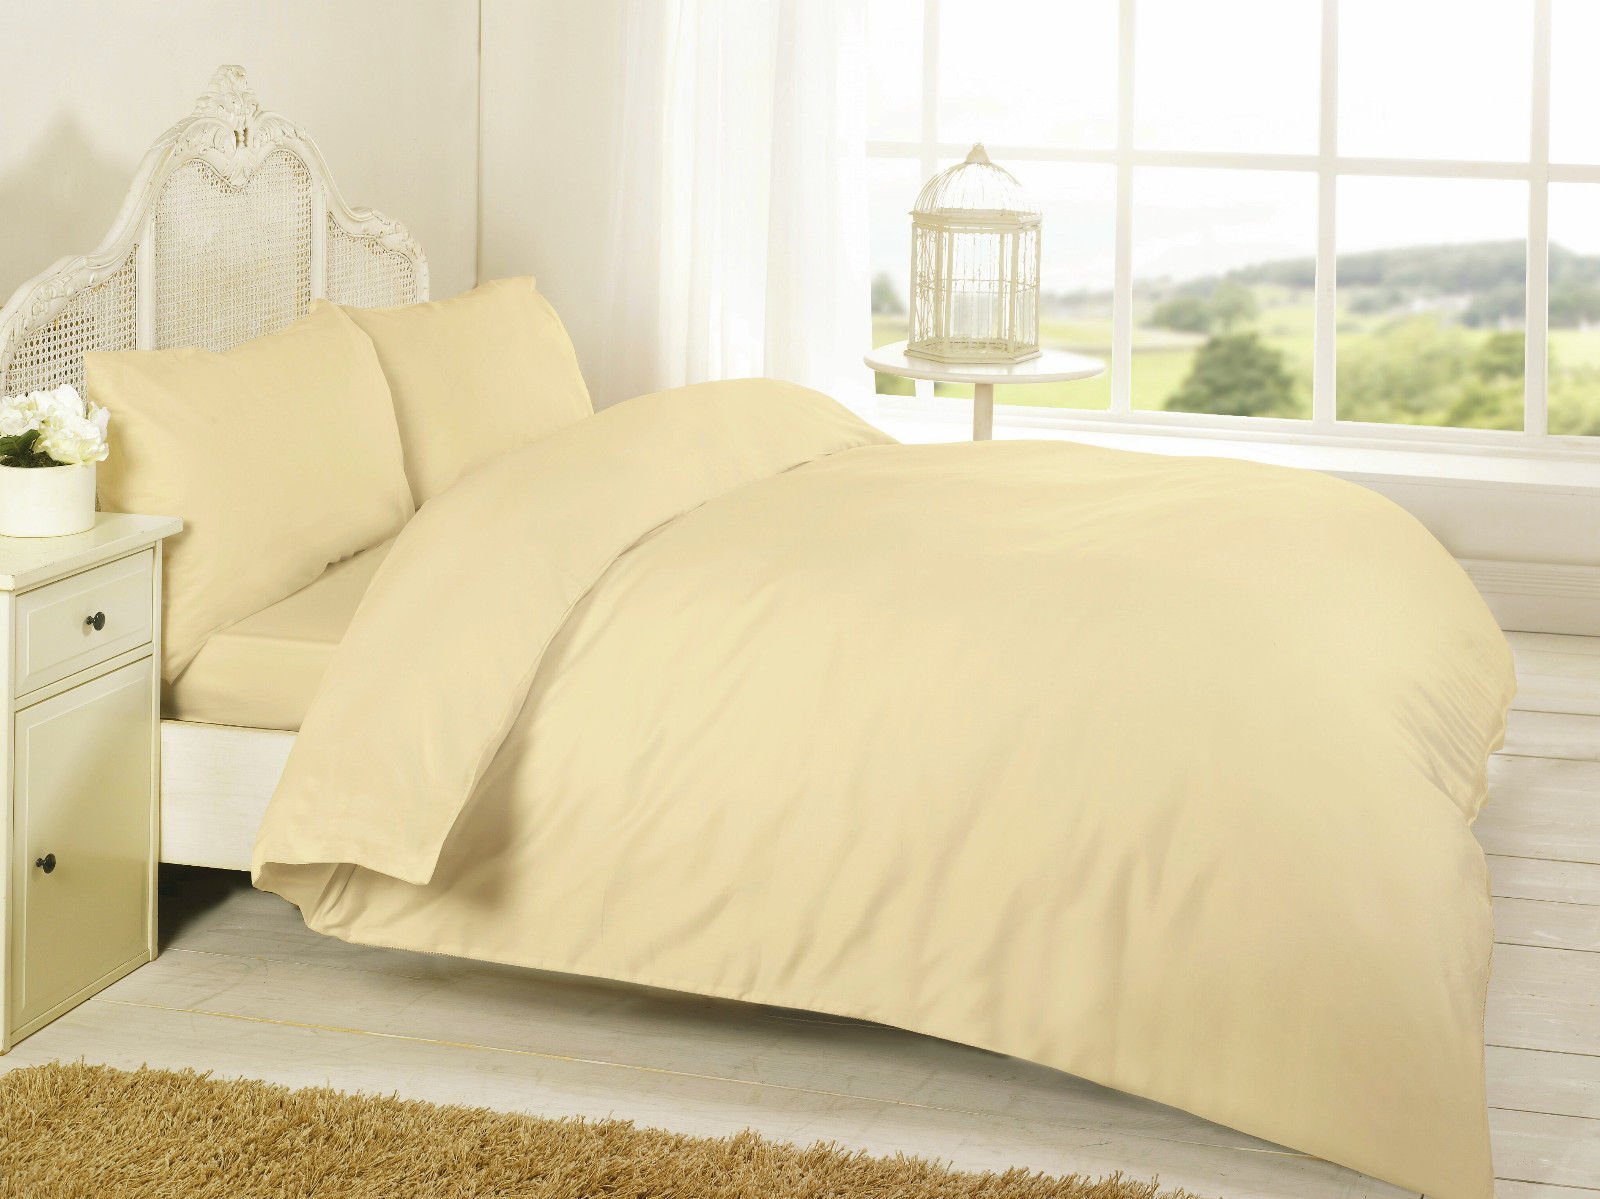 Egyptian Cotton T200 Duvet Cover Set In Several Sizes & Color, Pillow Cases Sold Separately - TheComfortshop.co.ukDuvet Covers0721718961482thecomfortshopTheComfortshop.co.ukBlack T200 Duvet SingleBlackSingleEgyptian Cotton T200 Duvet Cover Set In Several Sizes & Color, Pillow Cases Sold Separately - TheComfortshop.co.uk